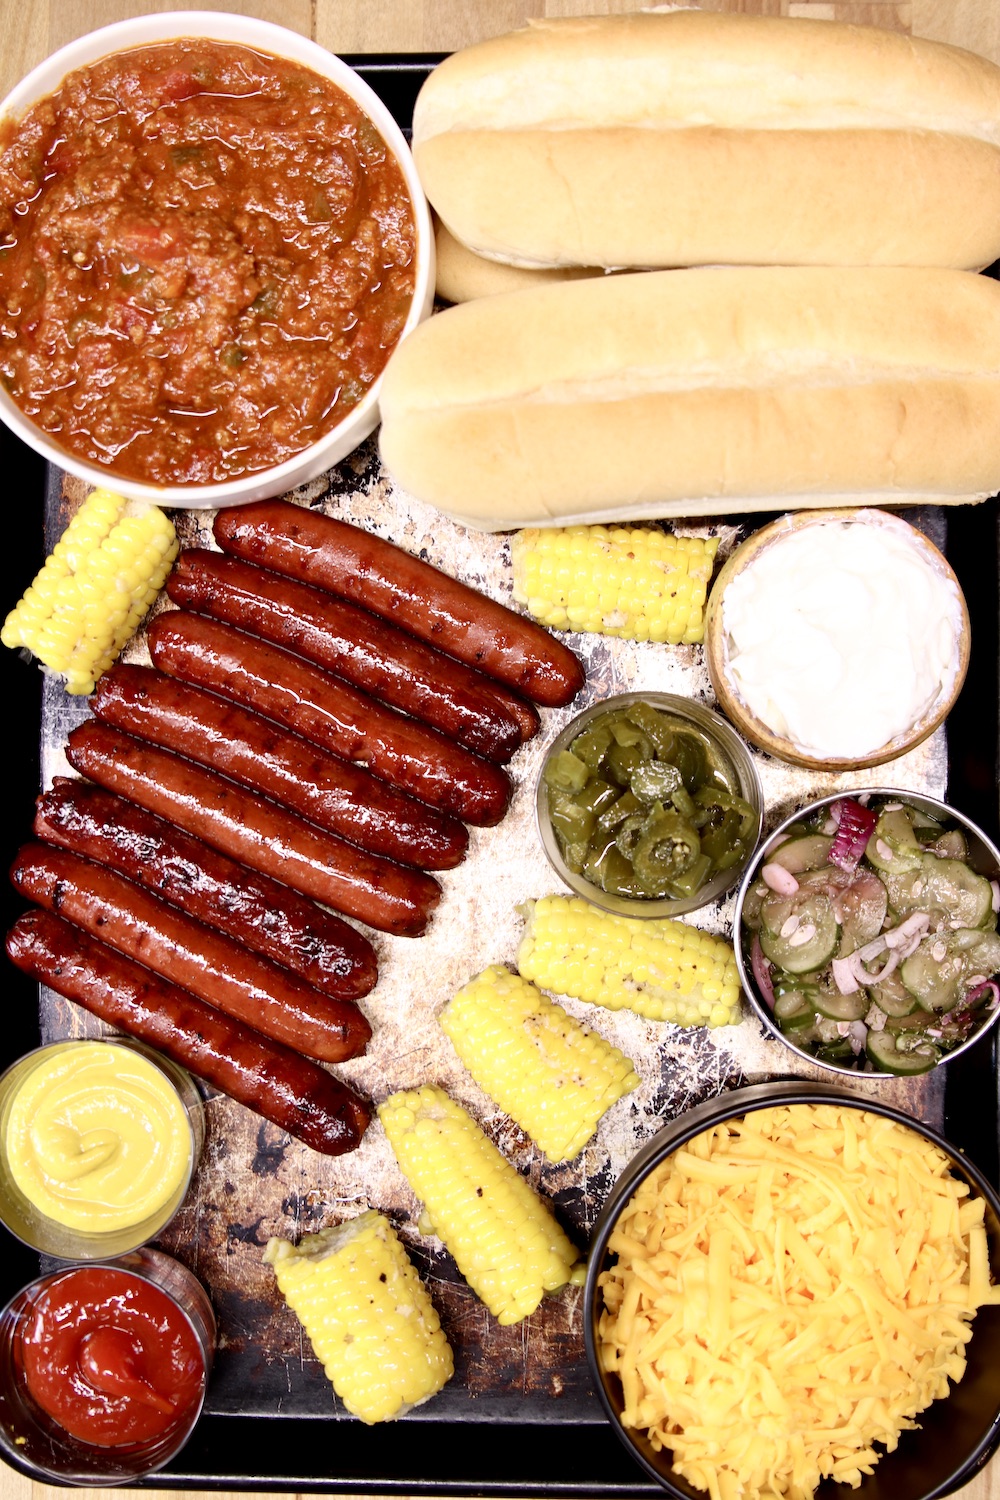 tray of grilled hot dogs, chili, buns, cheese, condiments for chili cheese dogs